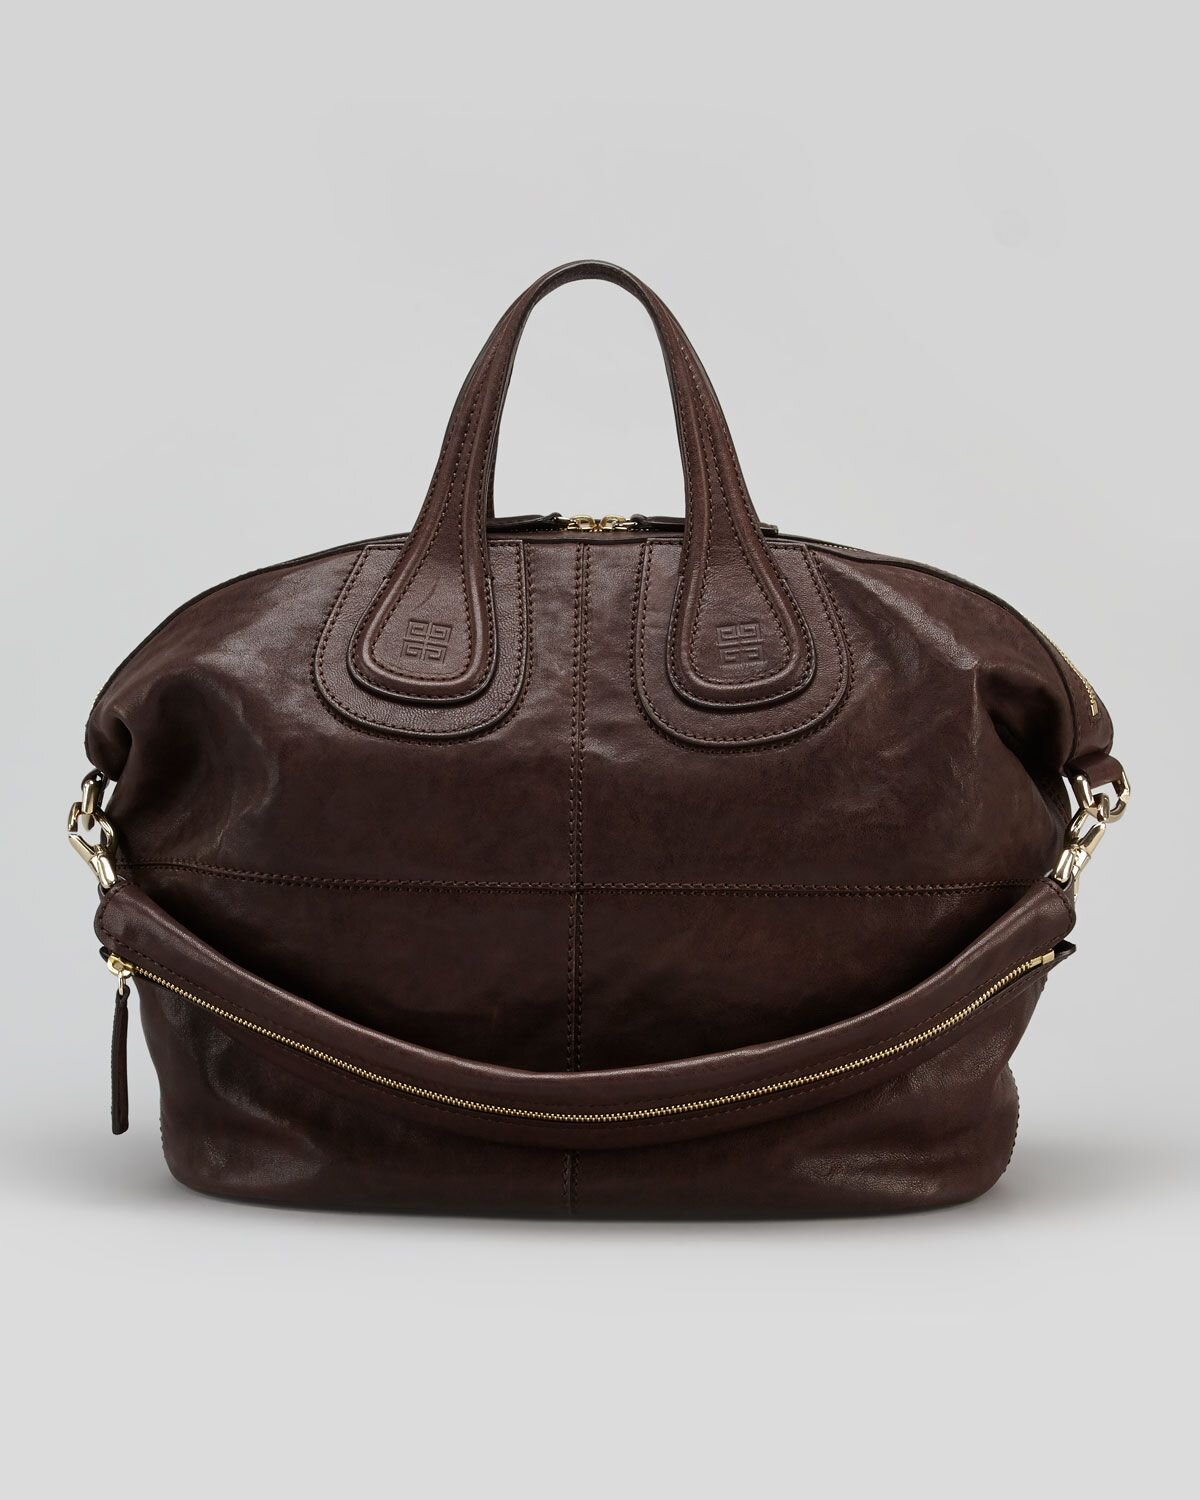 Givenchy Nightingale Tote in Chocolate Brown Leather.jpg